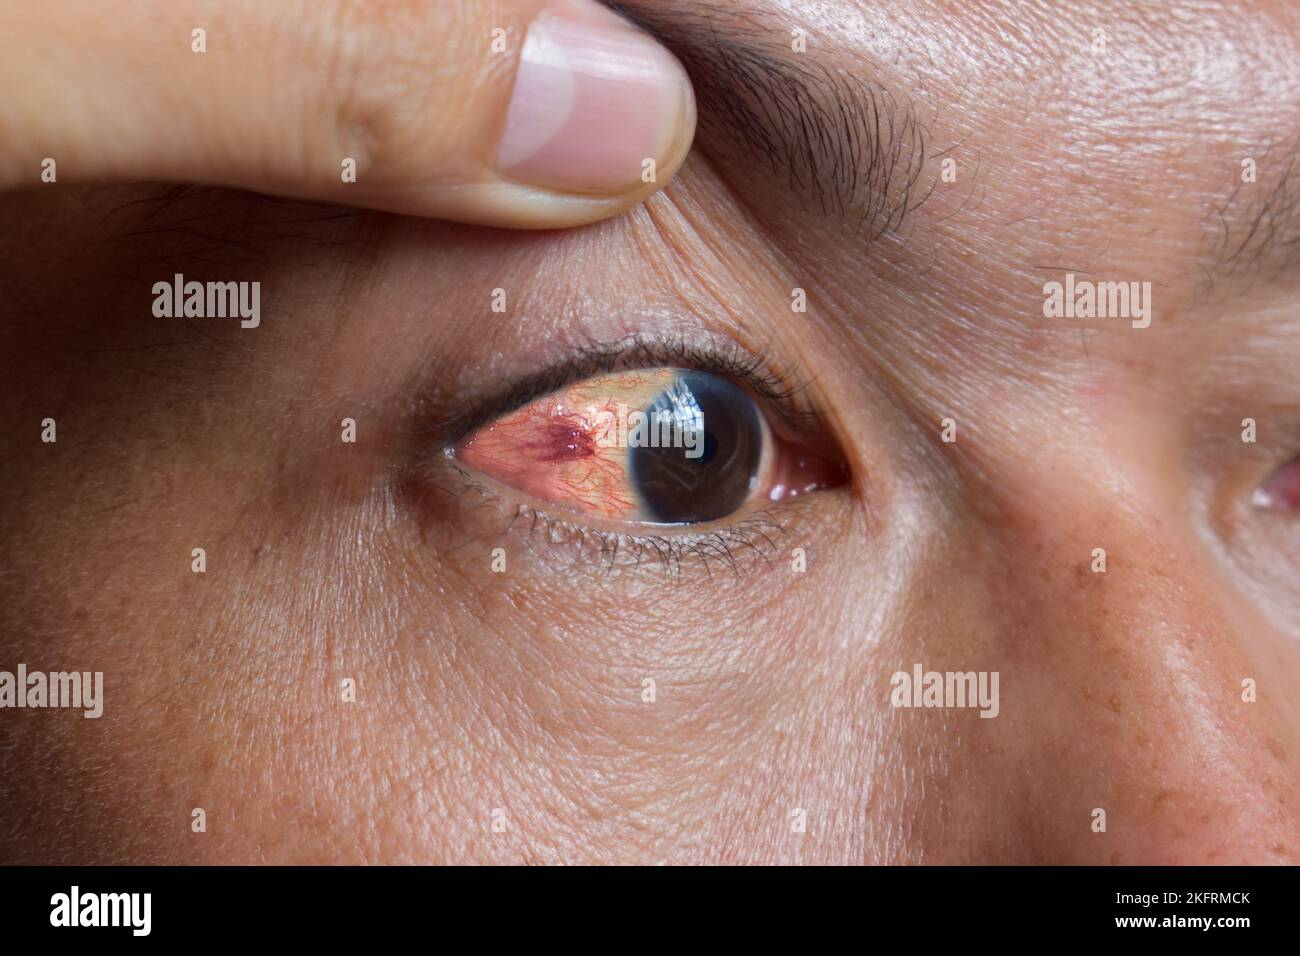 Ocular larva migrans or dilated vessels in the eye of Southeast Asian man. Stock Photo